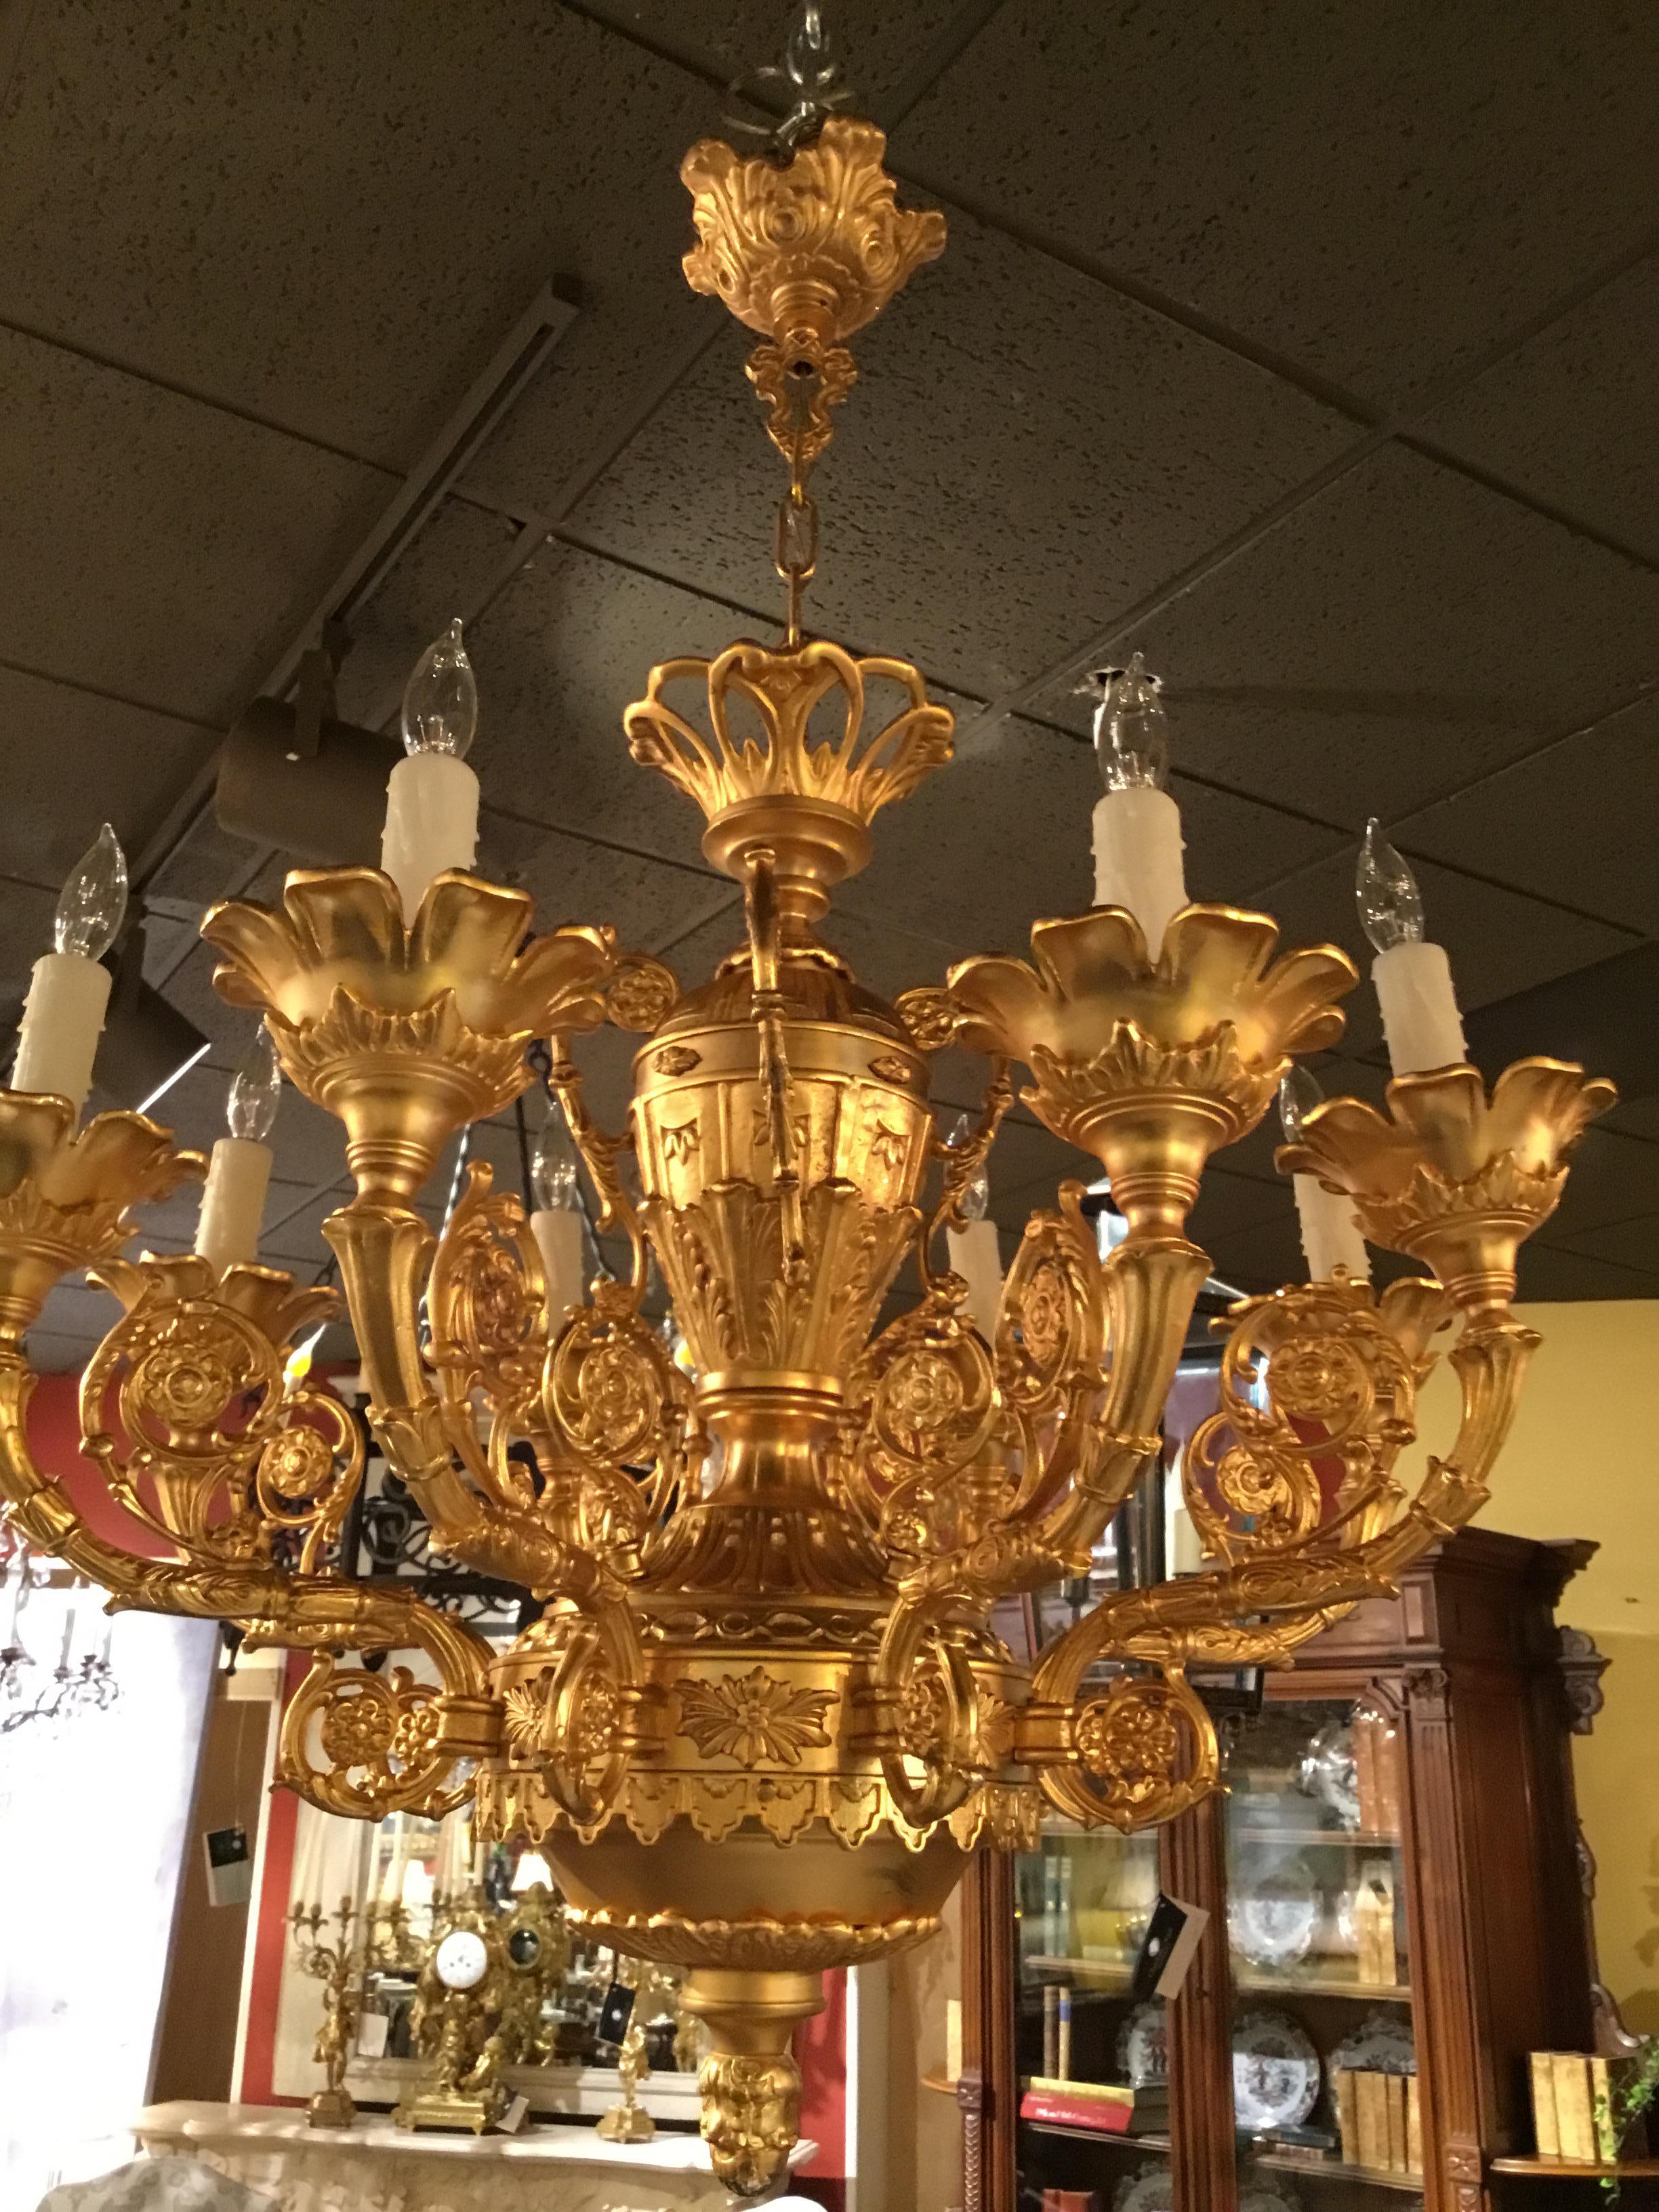 Stunning fixture featuring an urn-shaped stem surmounted by contoured arms
Ornately decorated with scrolling leaves and rosettes, and having floral
Inspired candle cups with acanthus overlay. Exhibiting a lustrous gold wash.